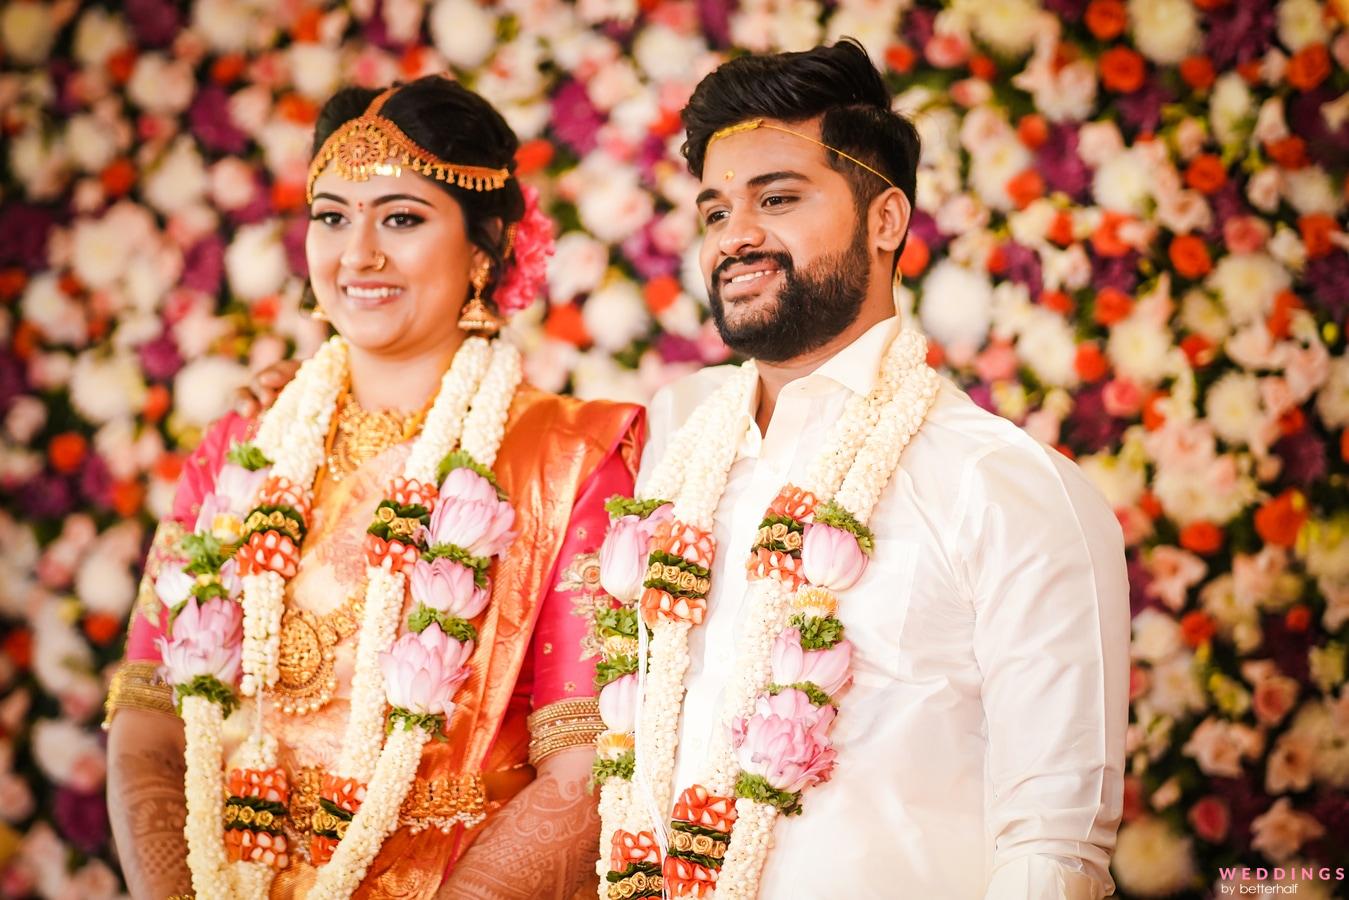 Multicultural wedding photographers in Chennai — Incognito frames